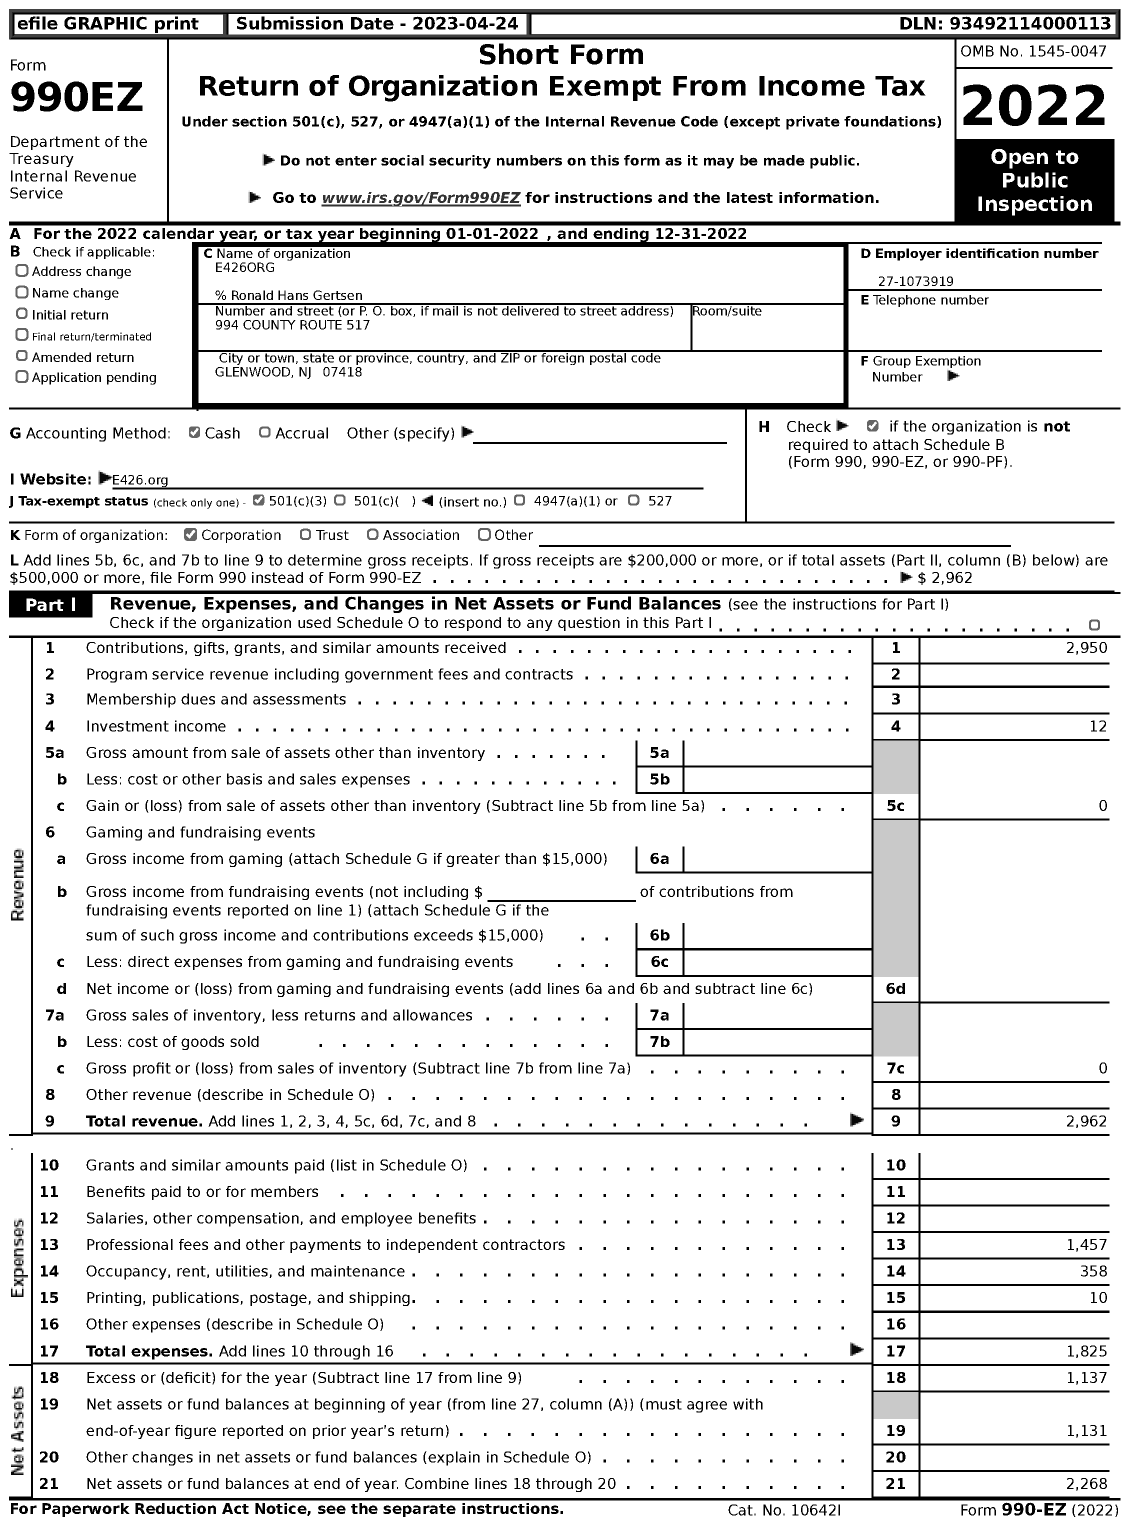 Image of first page of 2022 Form 990EZ for E426org